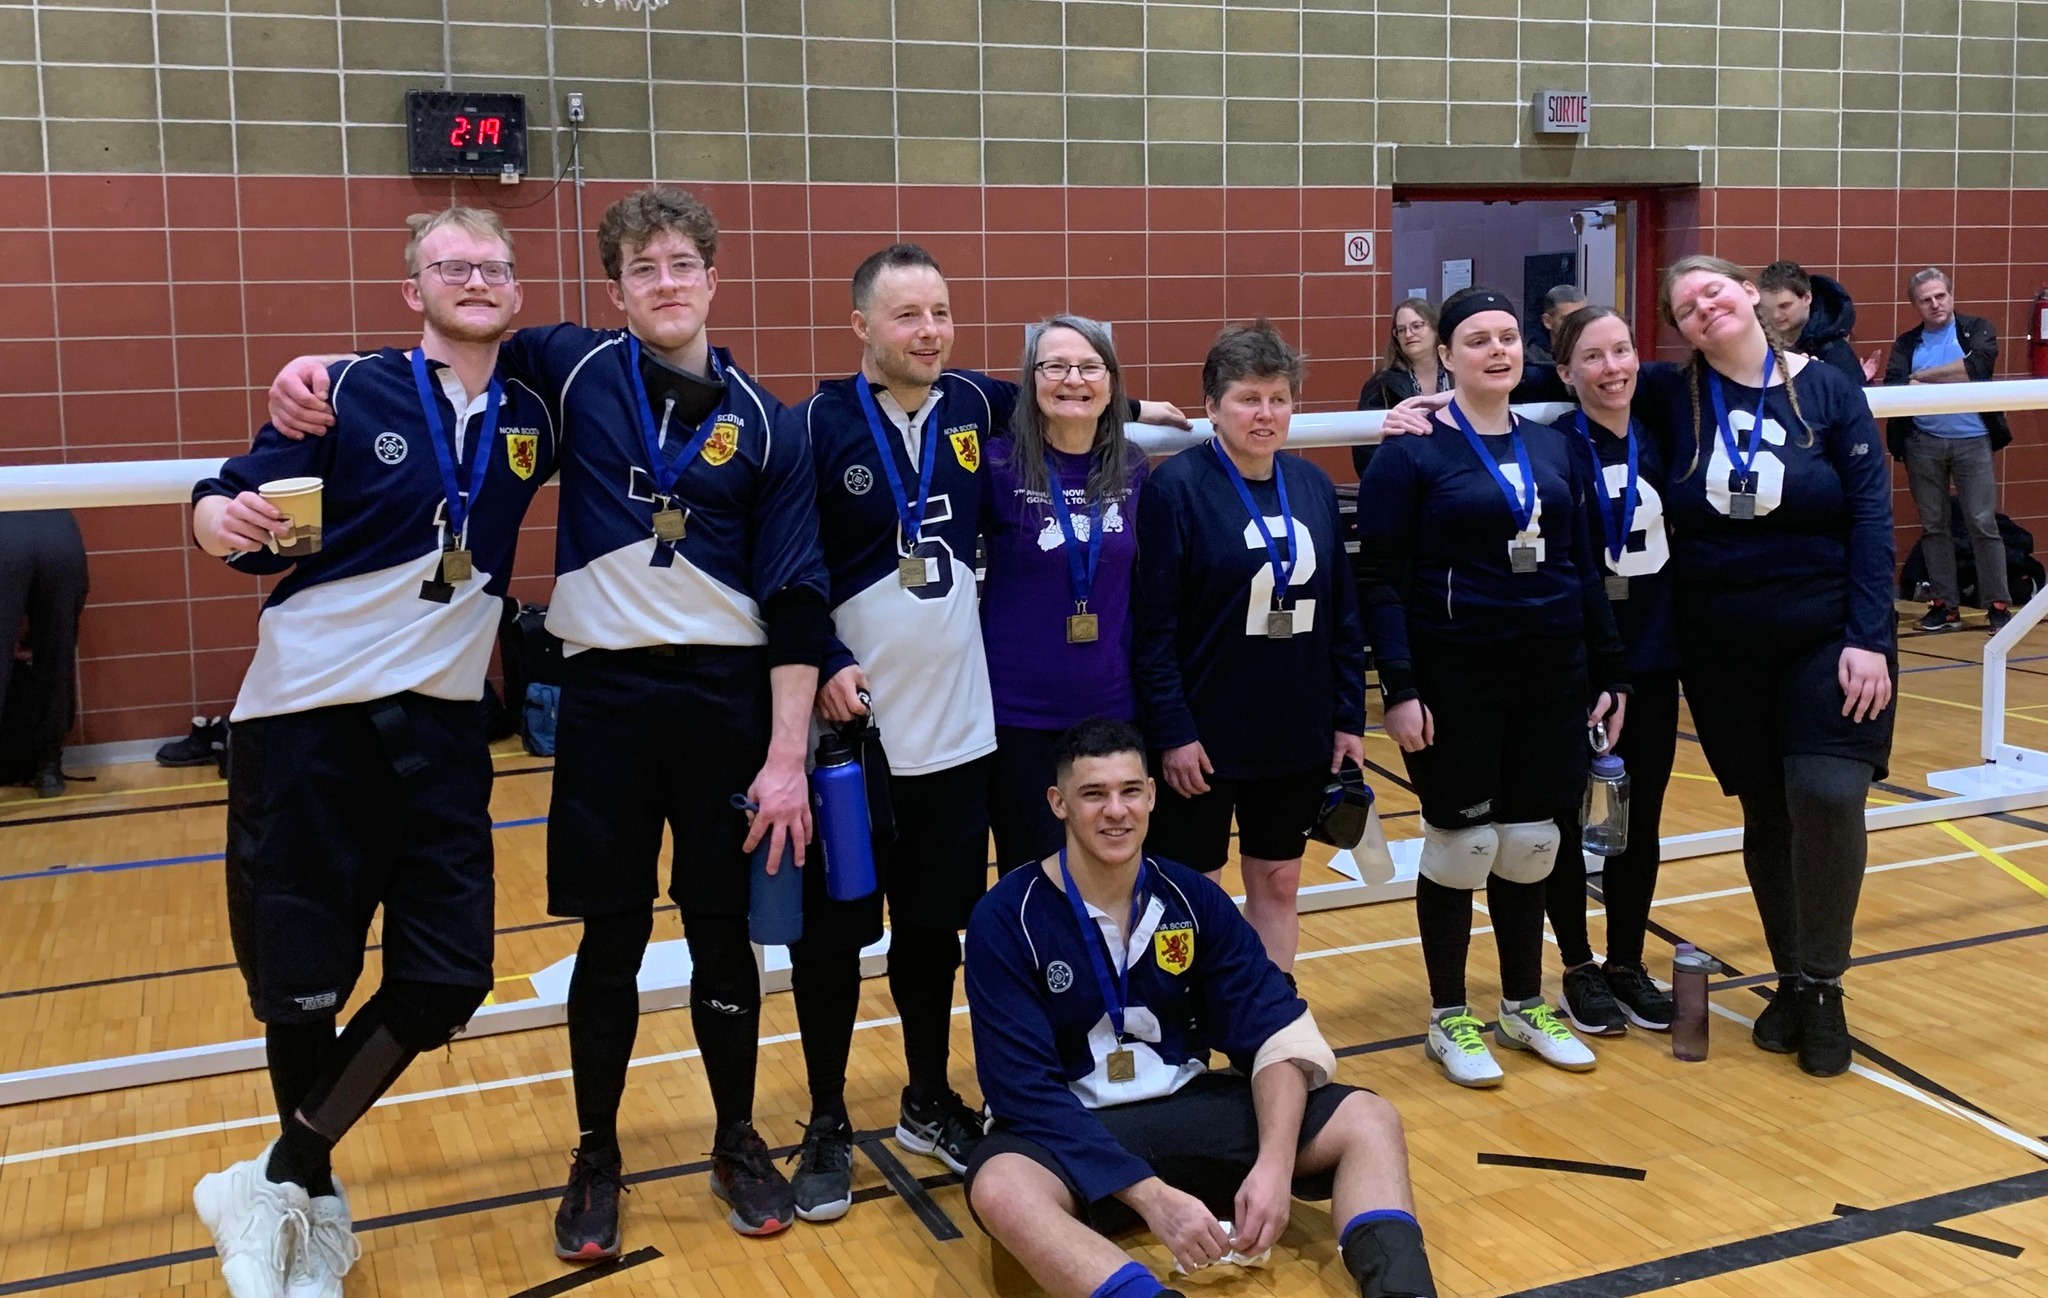 Nine people wearing medals around their next and smiling. Eight of them stand against a long goalball net and one sits on the floor in front of them.